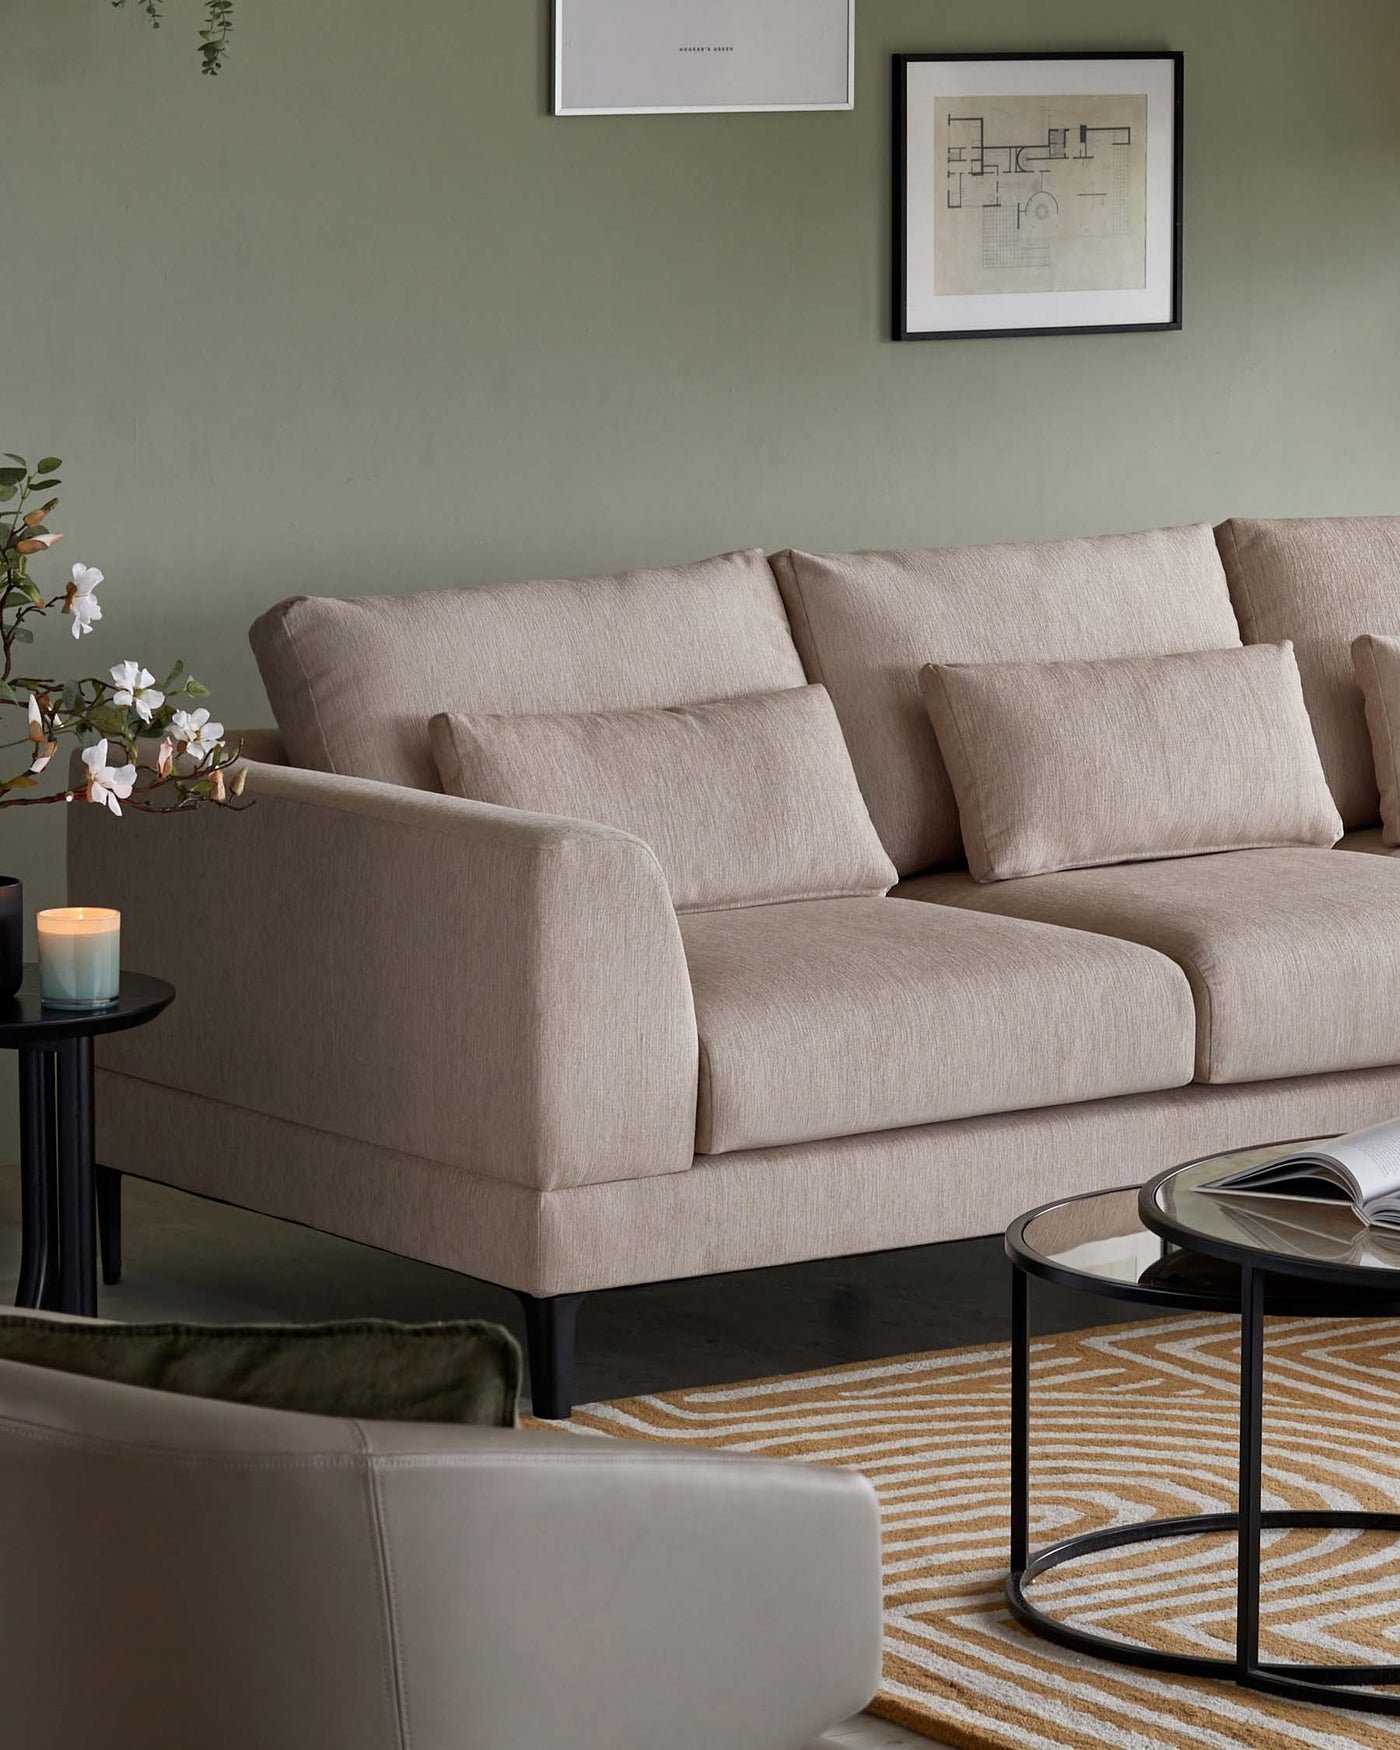 Beige fabric three-seater sofa with plush back cushions and minimalist black legs, paired with a round glass-top side table featuring a black frame. The sofa is complemented by a neutral-toned area rug with geometric patterns.